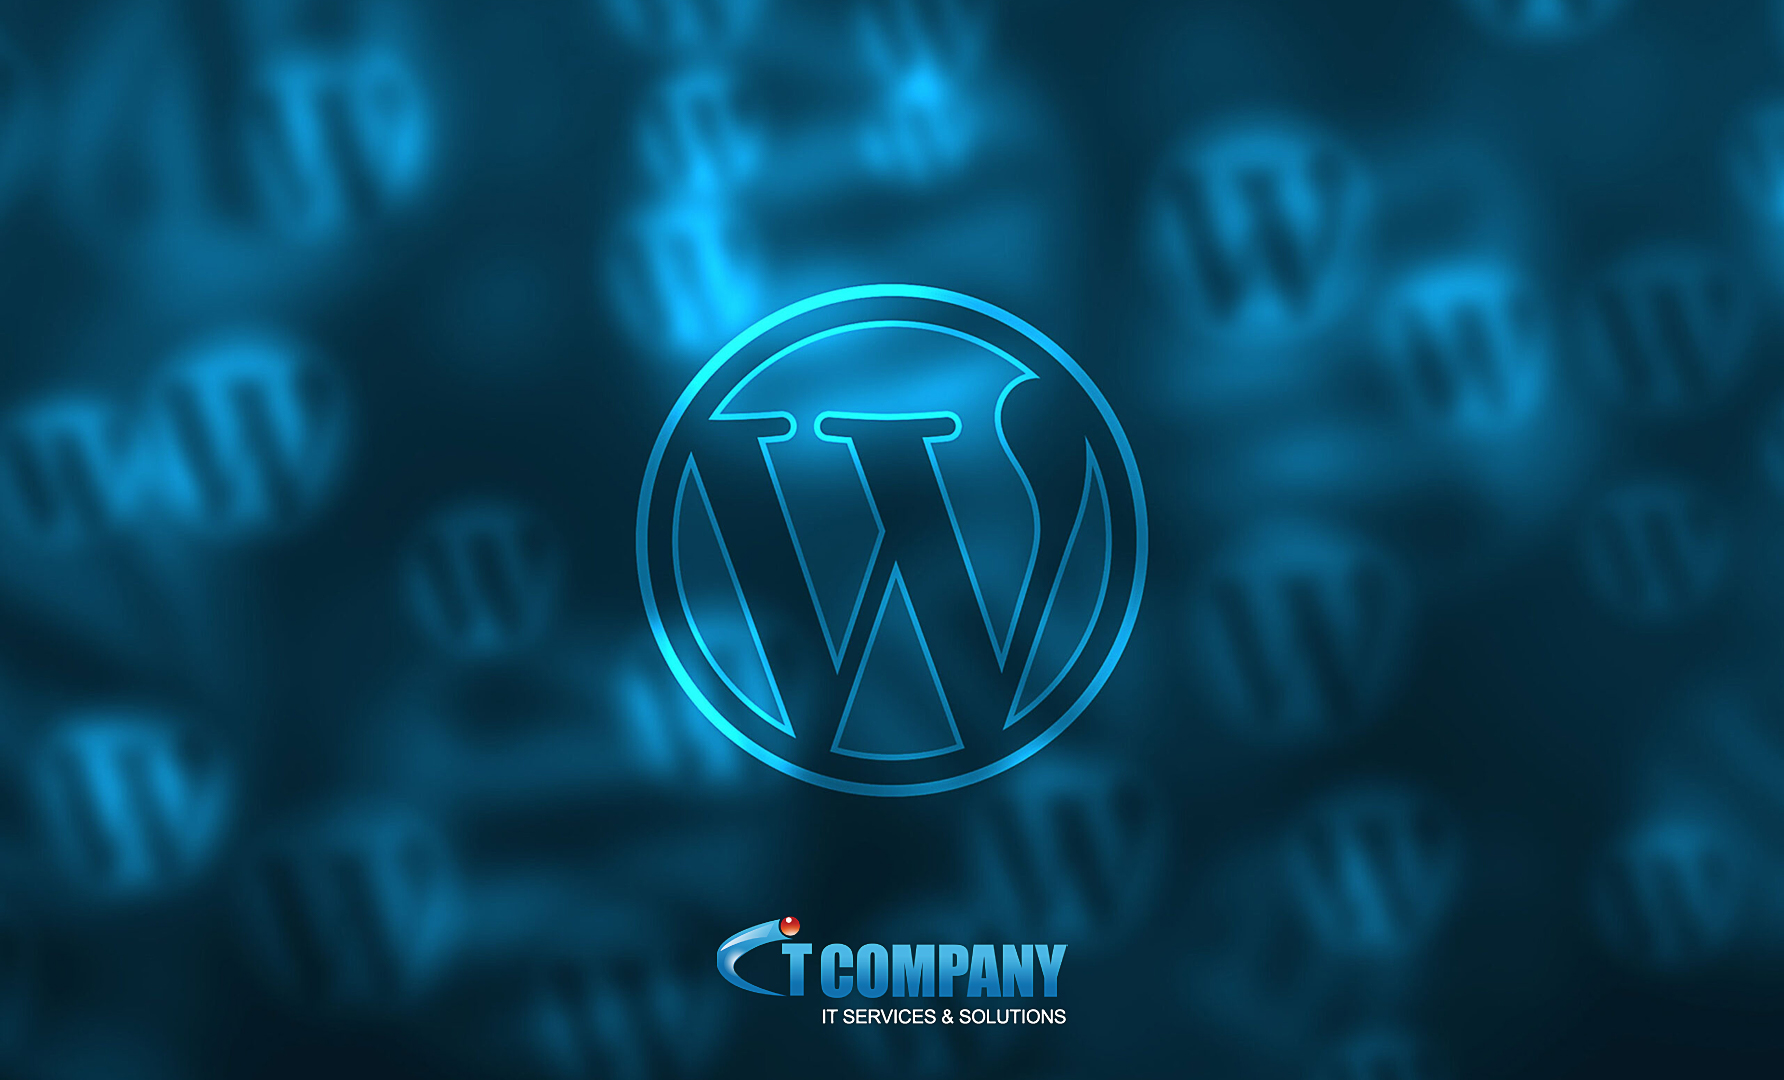 WordPress Sites security compromised after Cyberattack